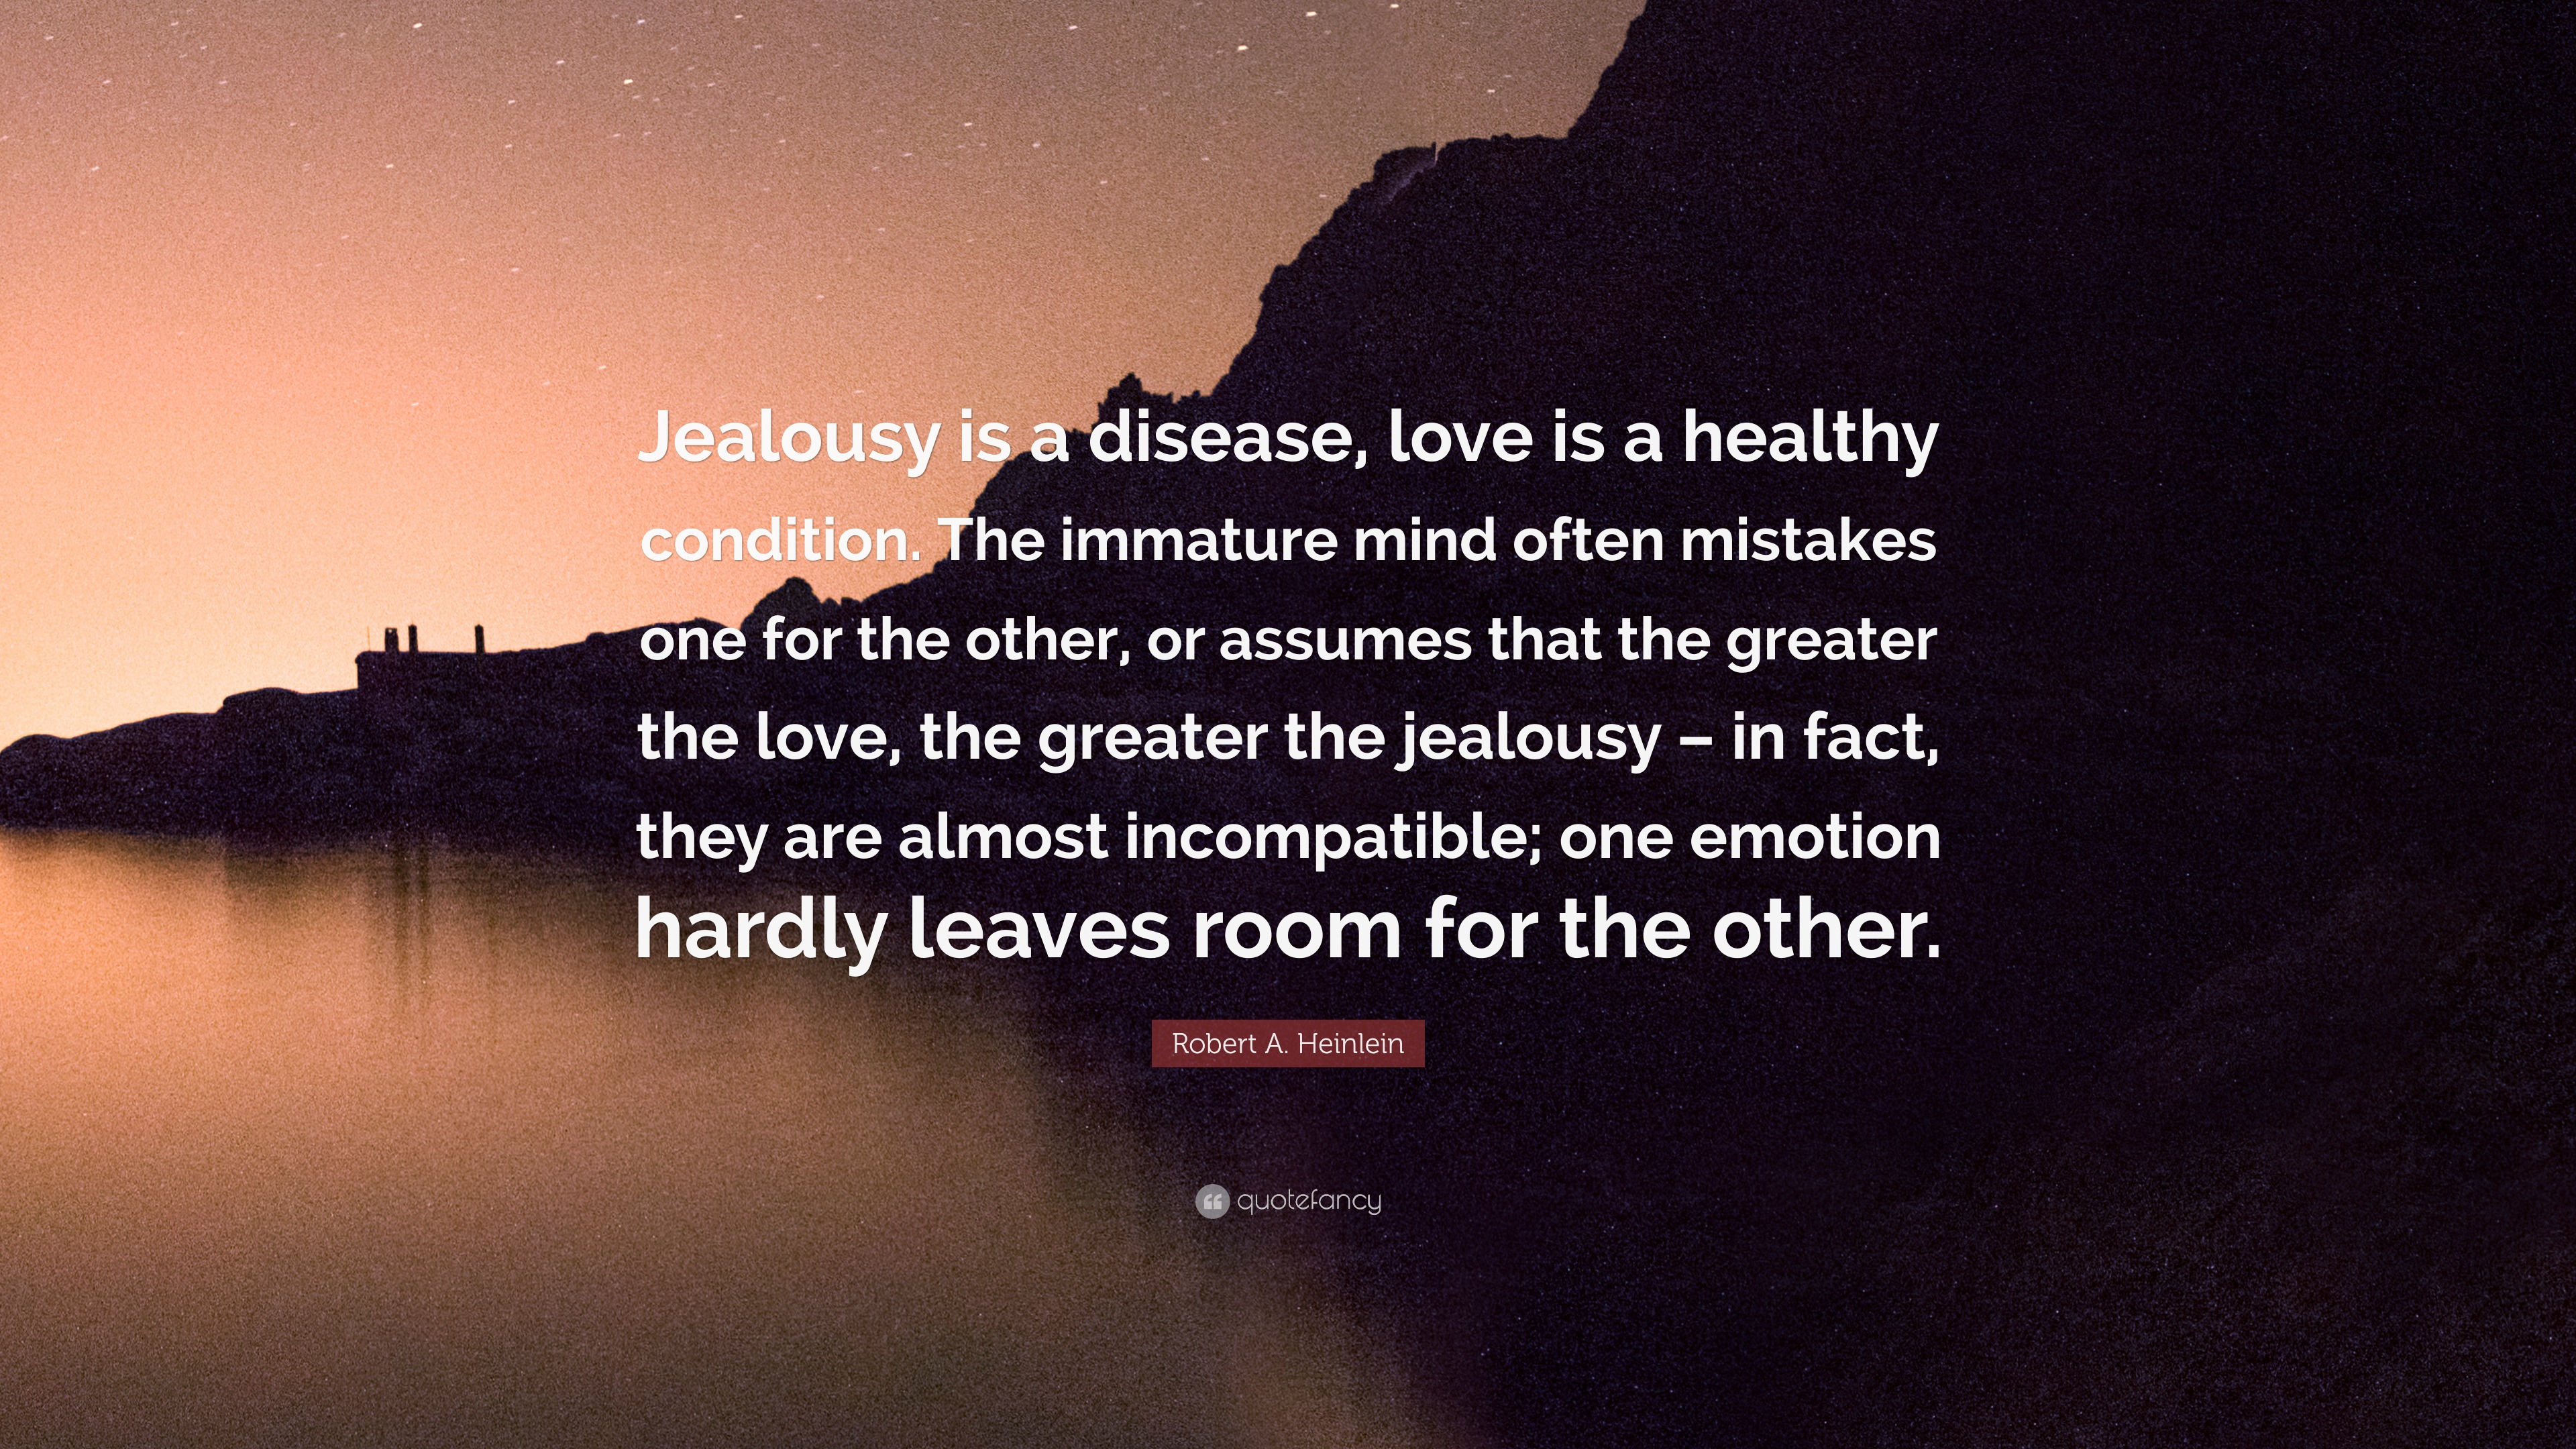 Robert A Heinlein Quote “Jealousy is a disease love is a healthy